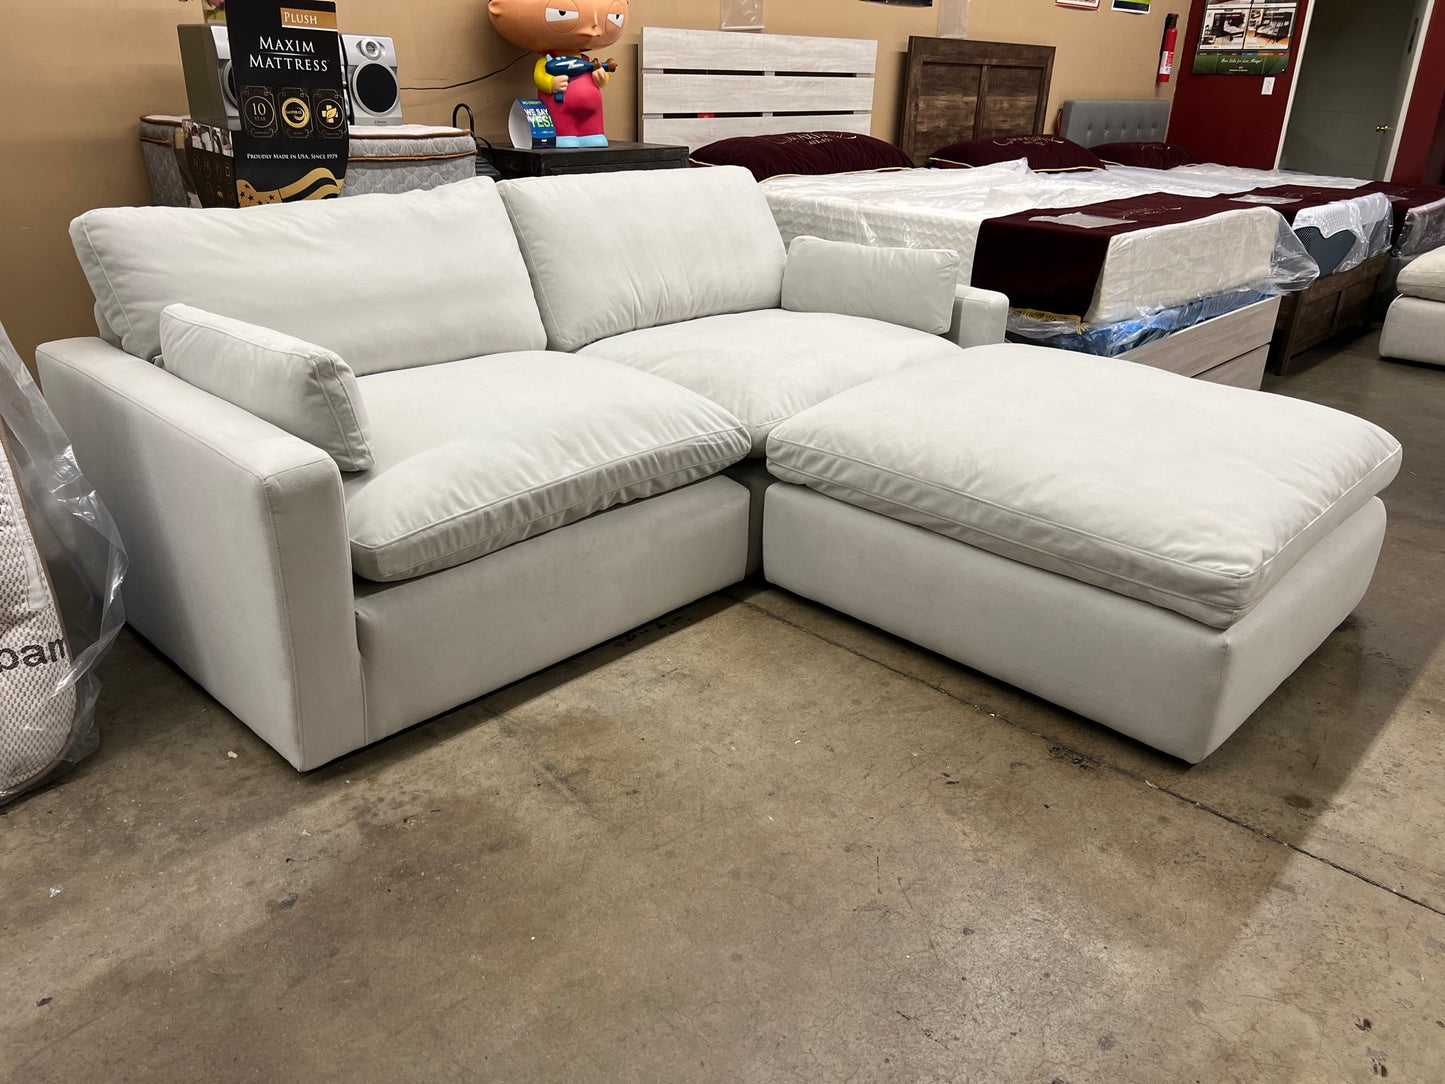 Divinity Ivory Velvet Feather Down Cloud Modular Sectional Sofa